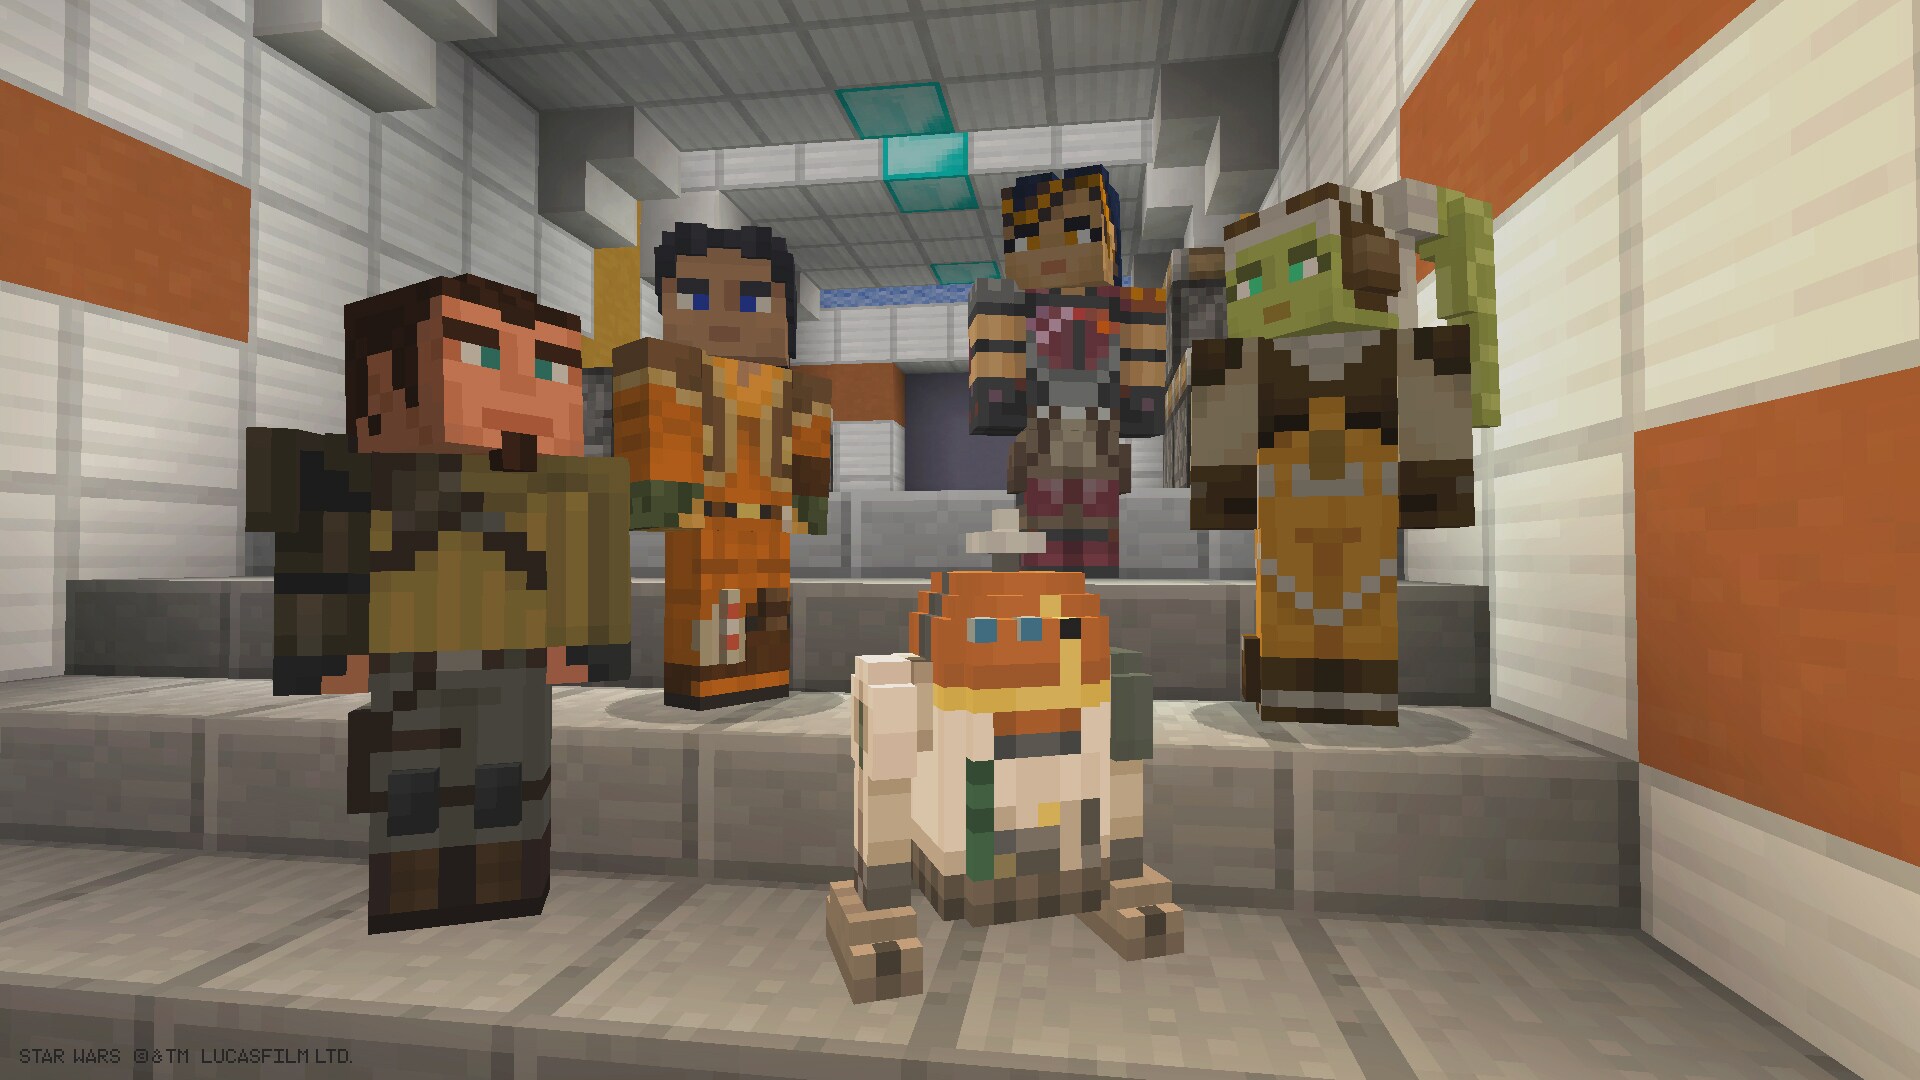 Star Wars Rebels Skin Pack Comes to Minecraft for Xbox